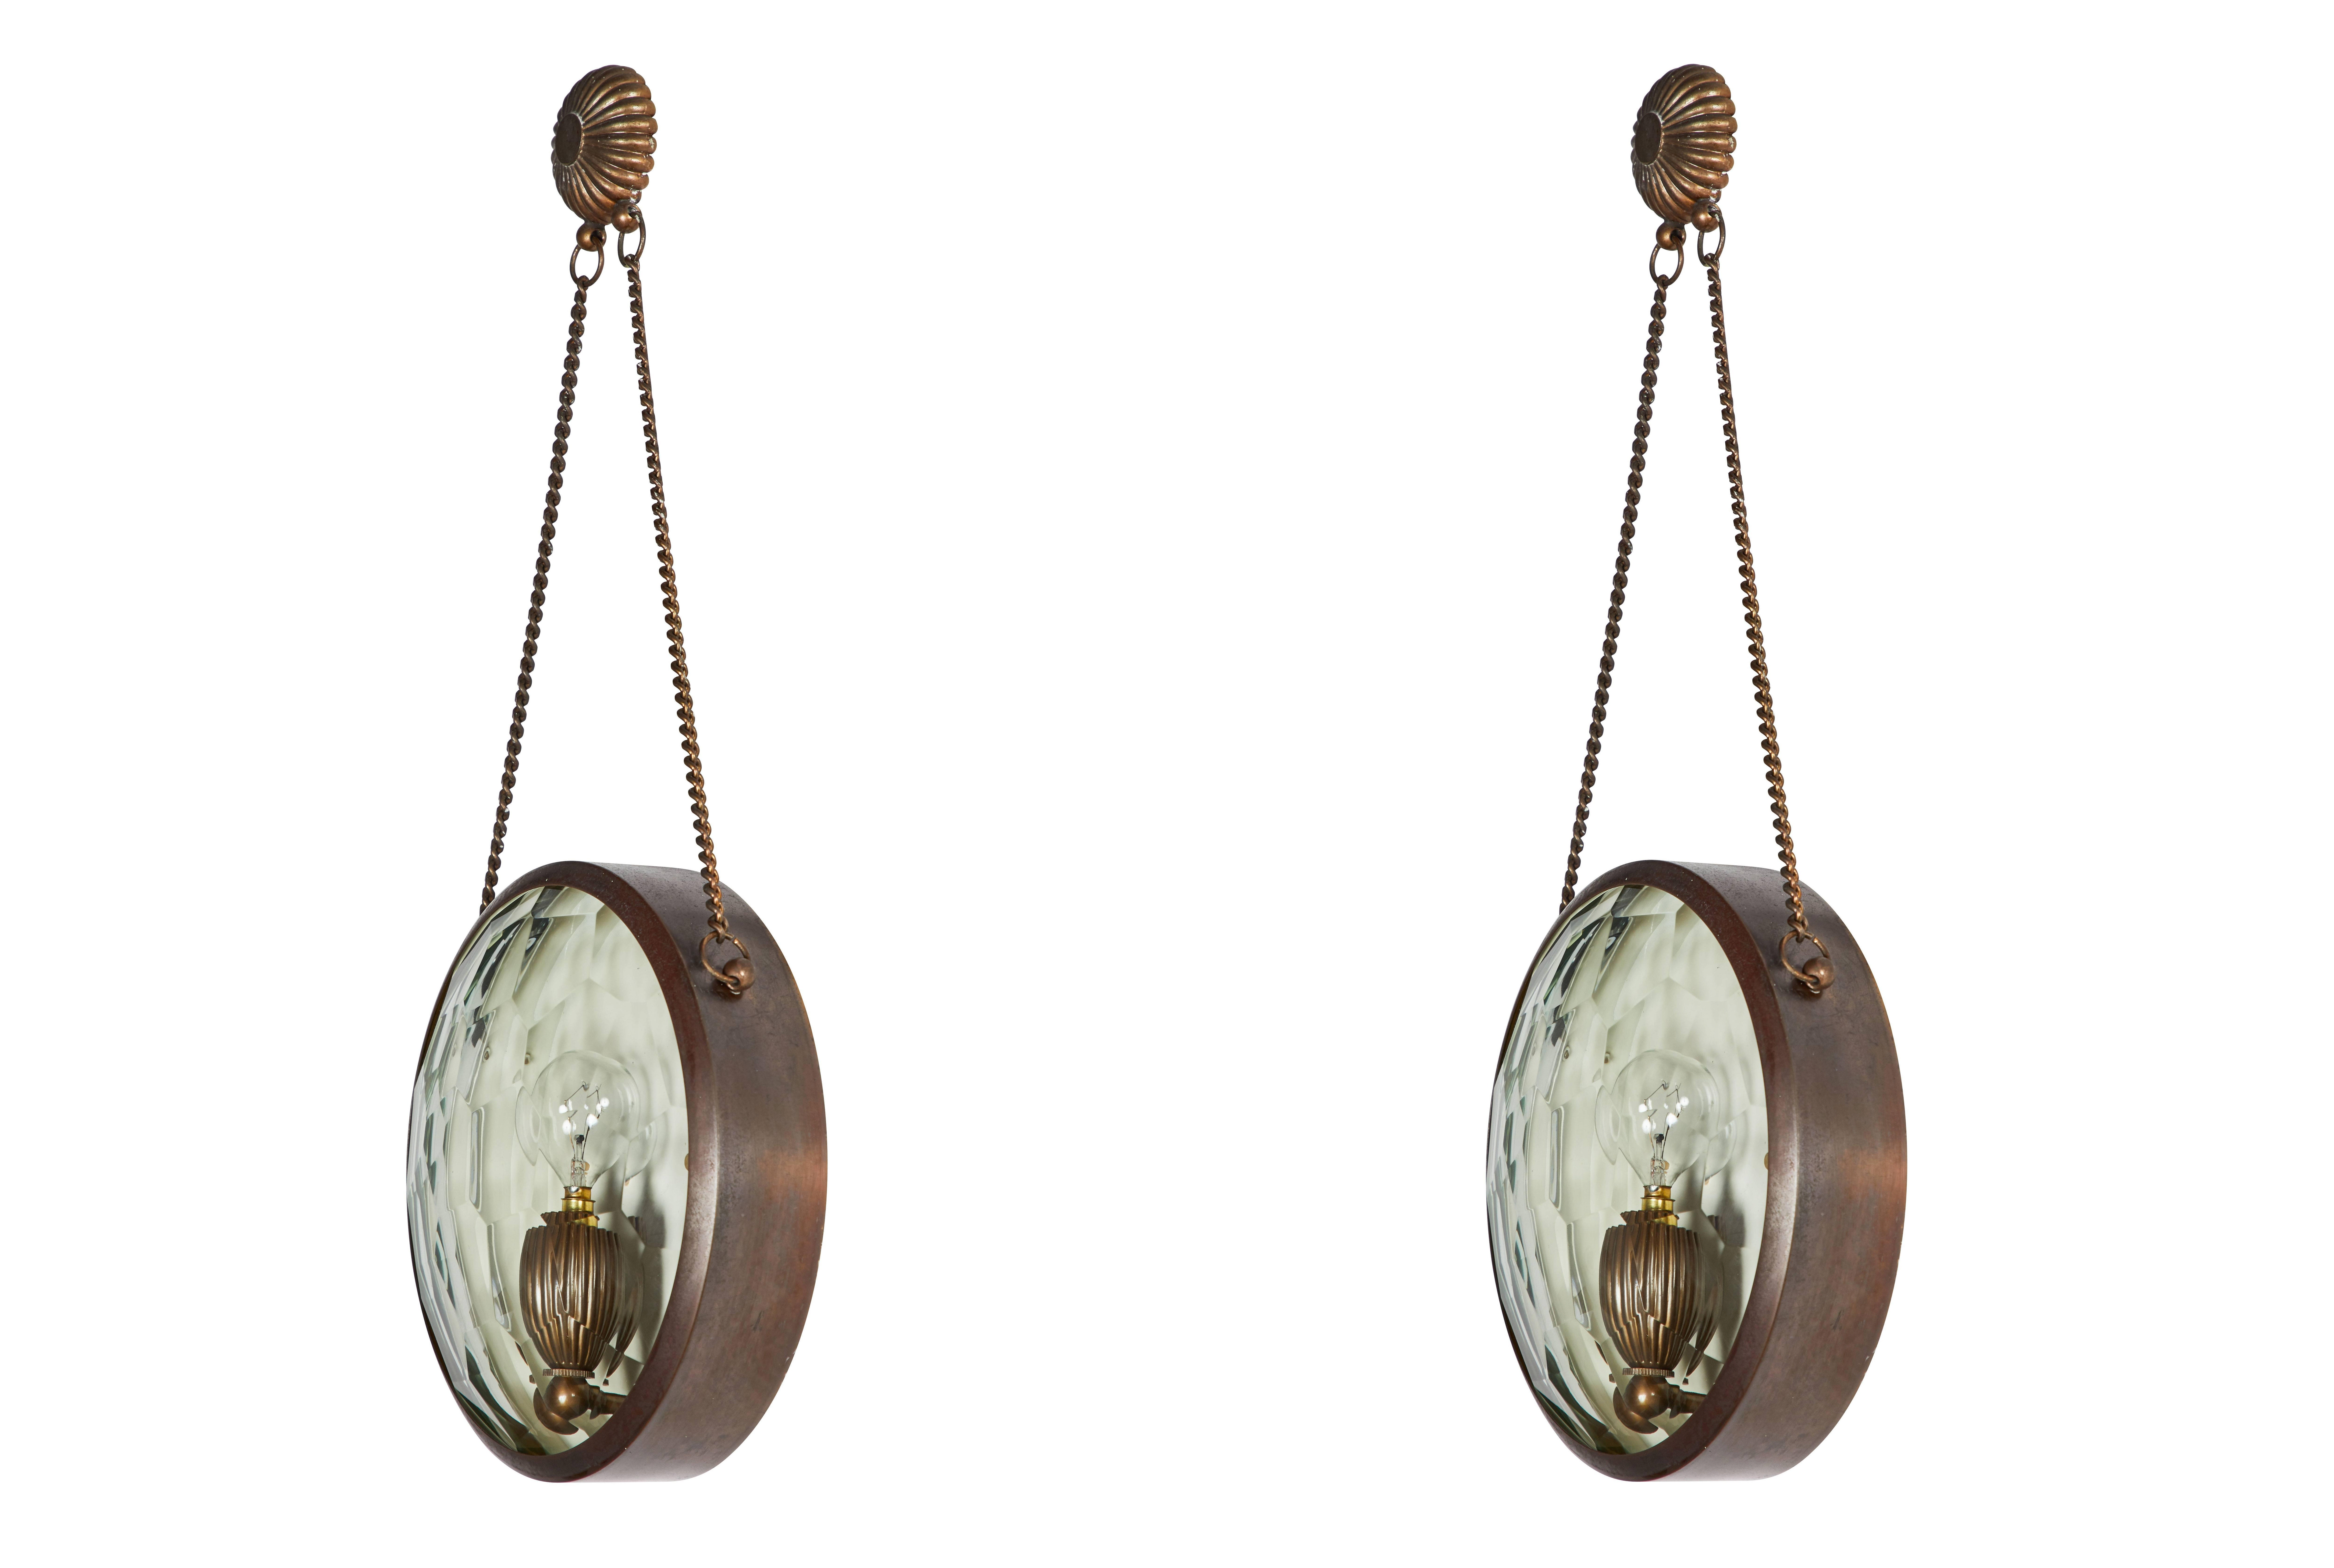 Two Italian wall lamps designed in Italy circa 1950s. Burnished brass, gemstone crystal. Wired for US junction boxes. Each light takes one E14 60w maximum bulb. Priced and sold Individually